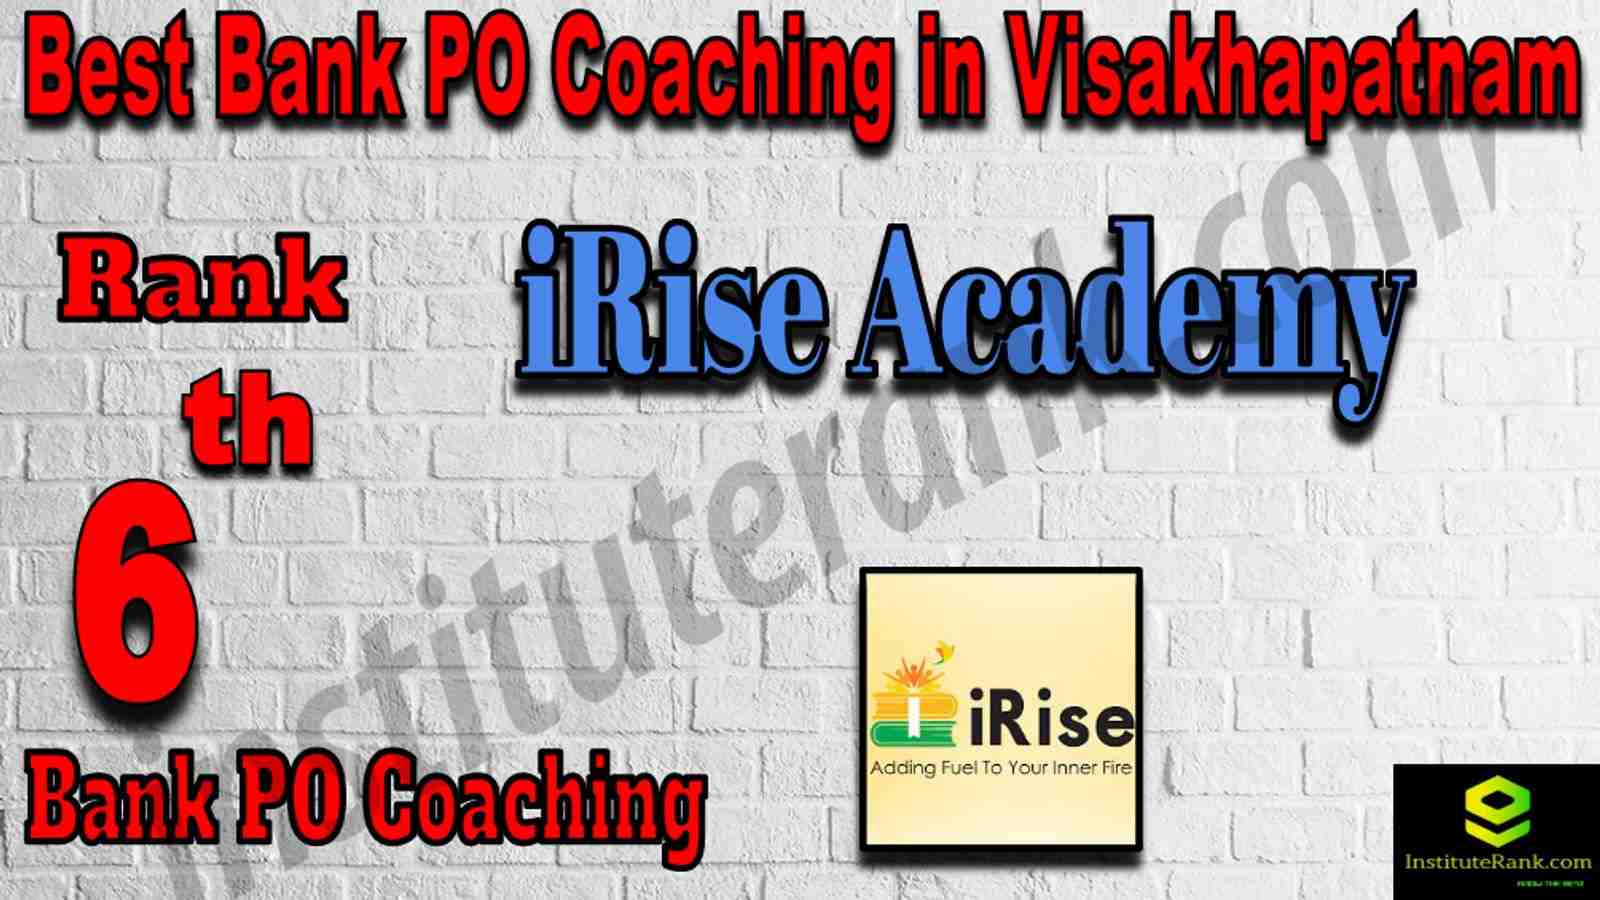 6th Best Bank PO Coaching in Visakhapatnam